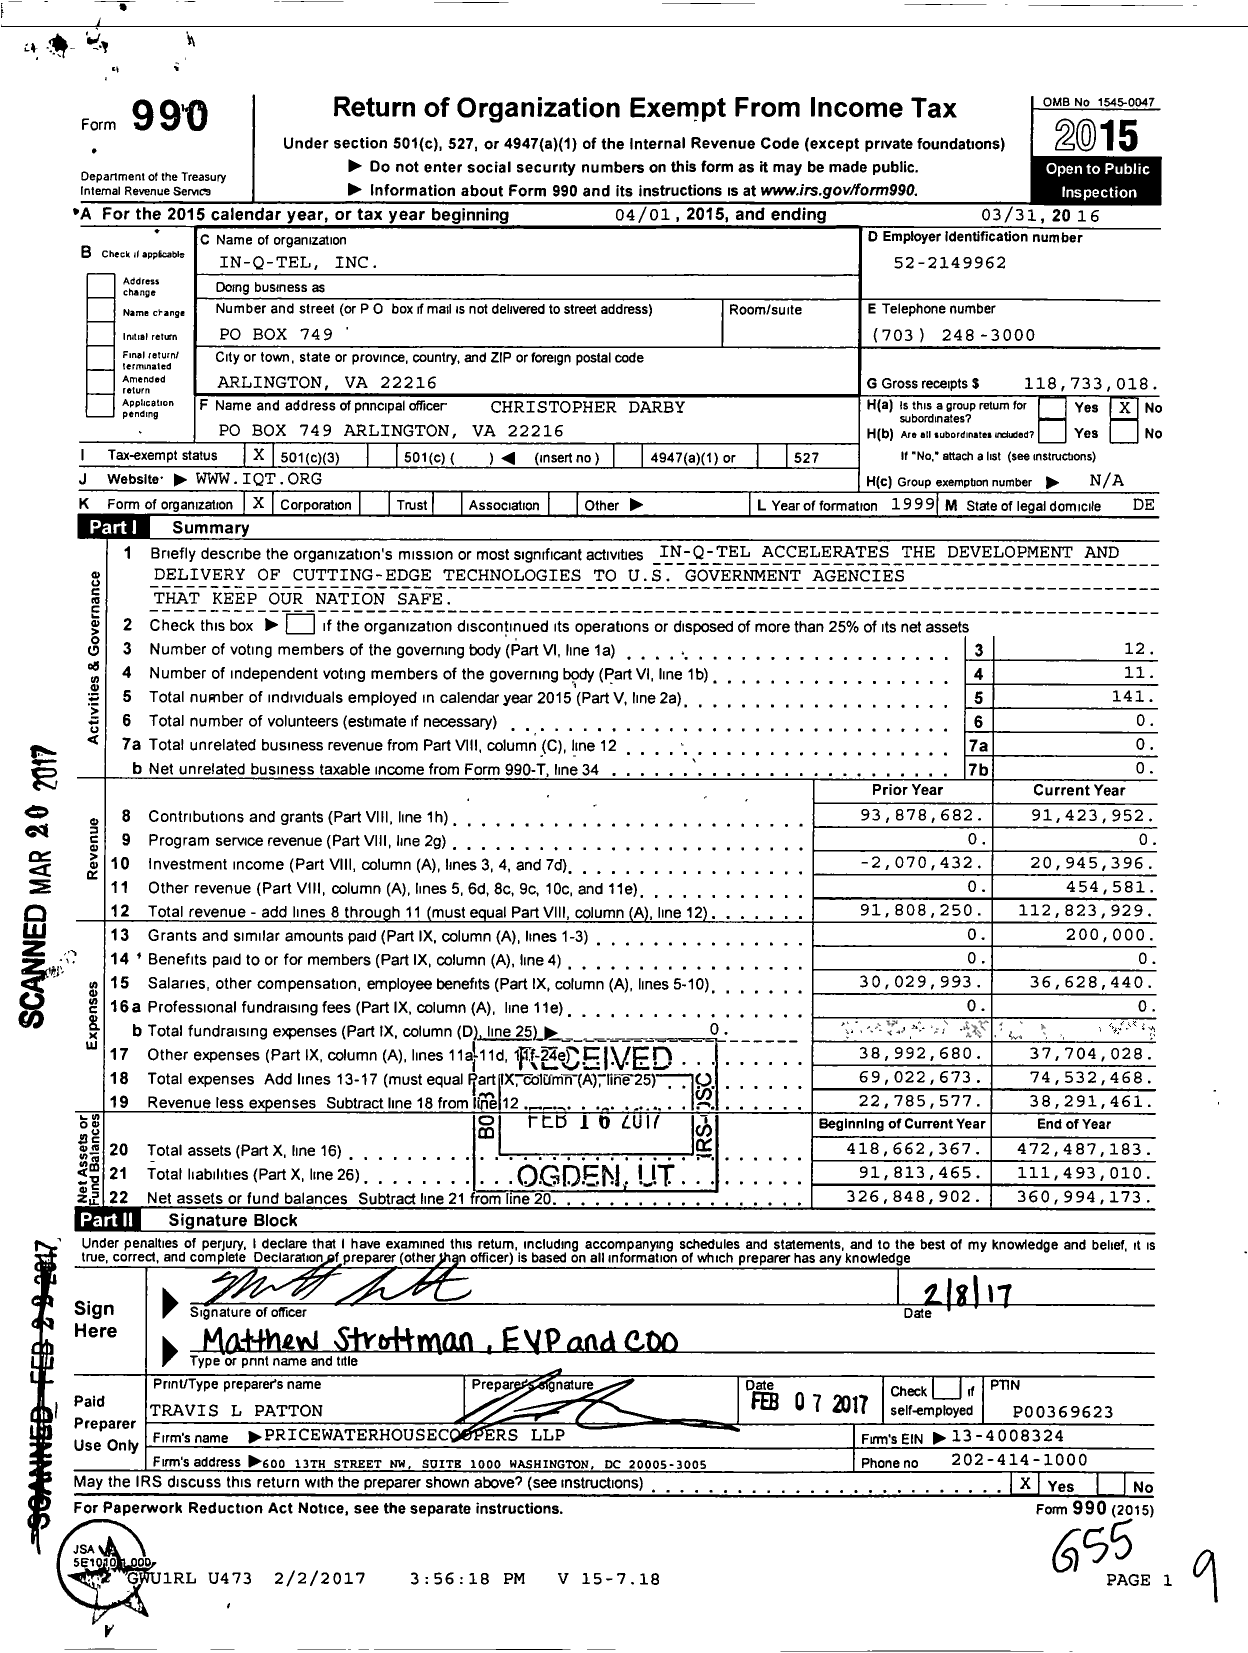 Image of first page of 2015 Form 990 for In-Q-Tel